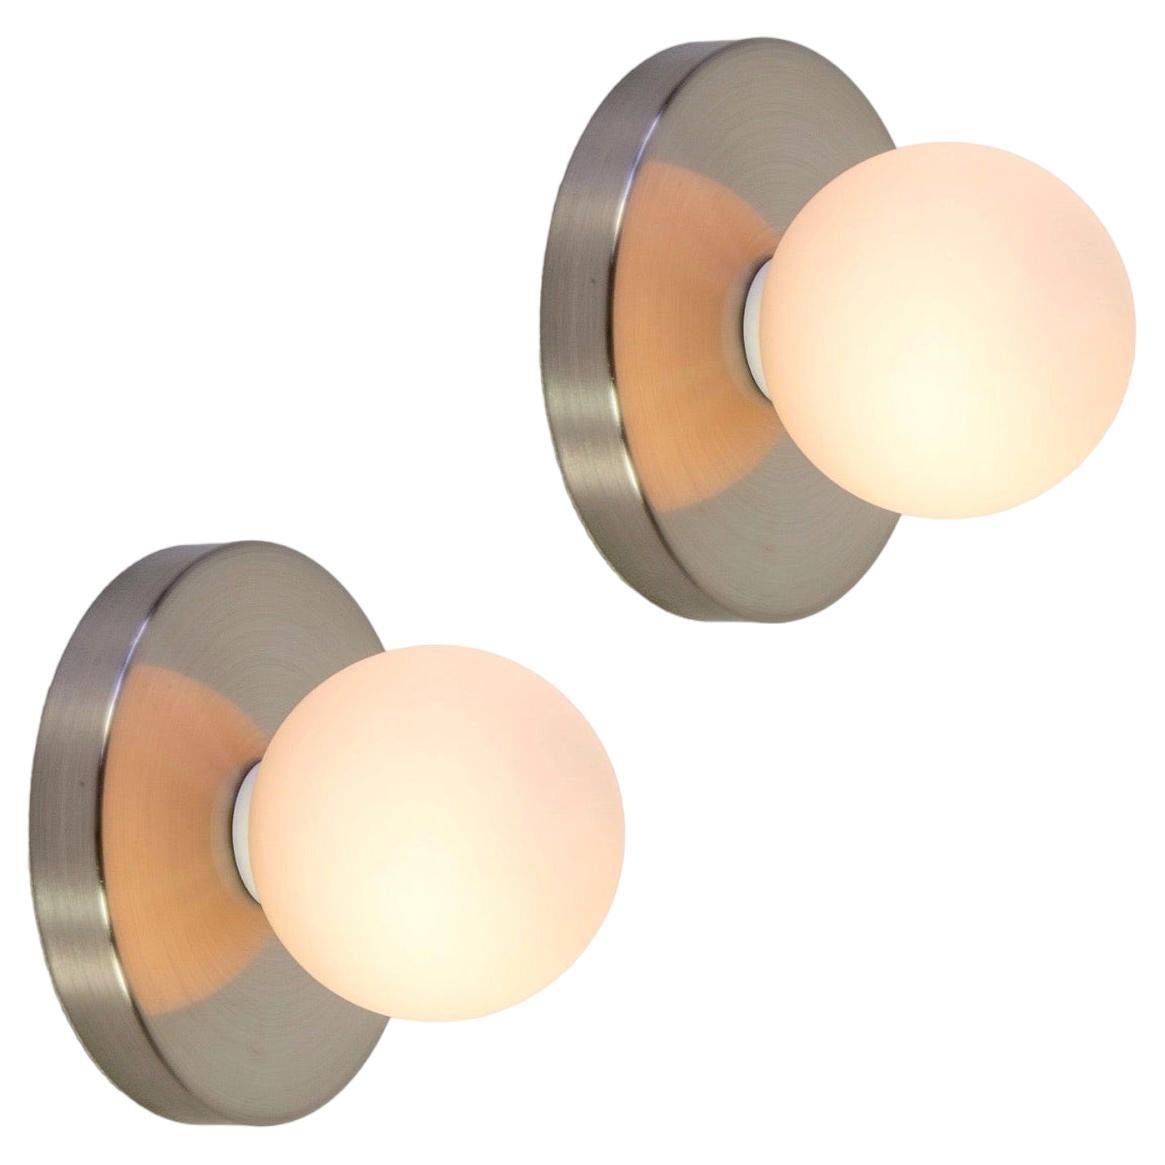 Pair of Globe Sconces by Research.Lighting, Brushed Nickel, Made to Order For Sale